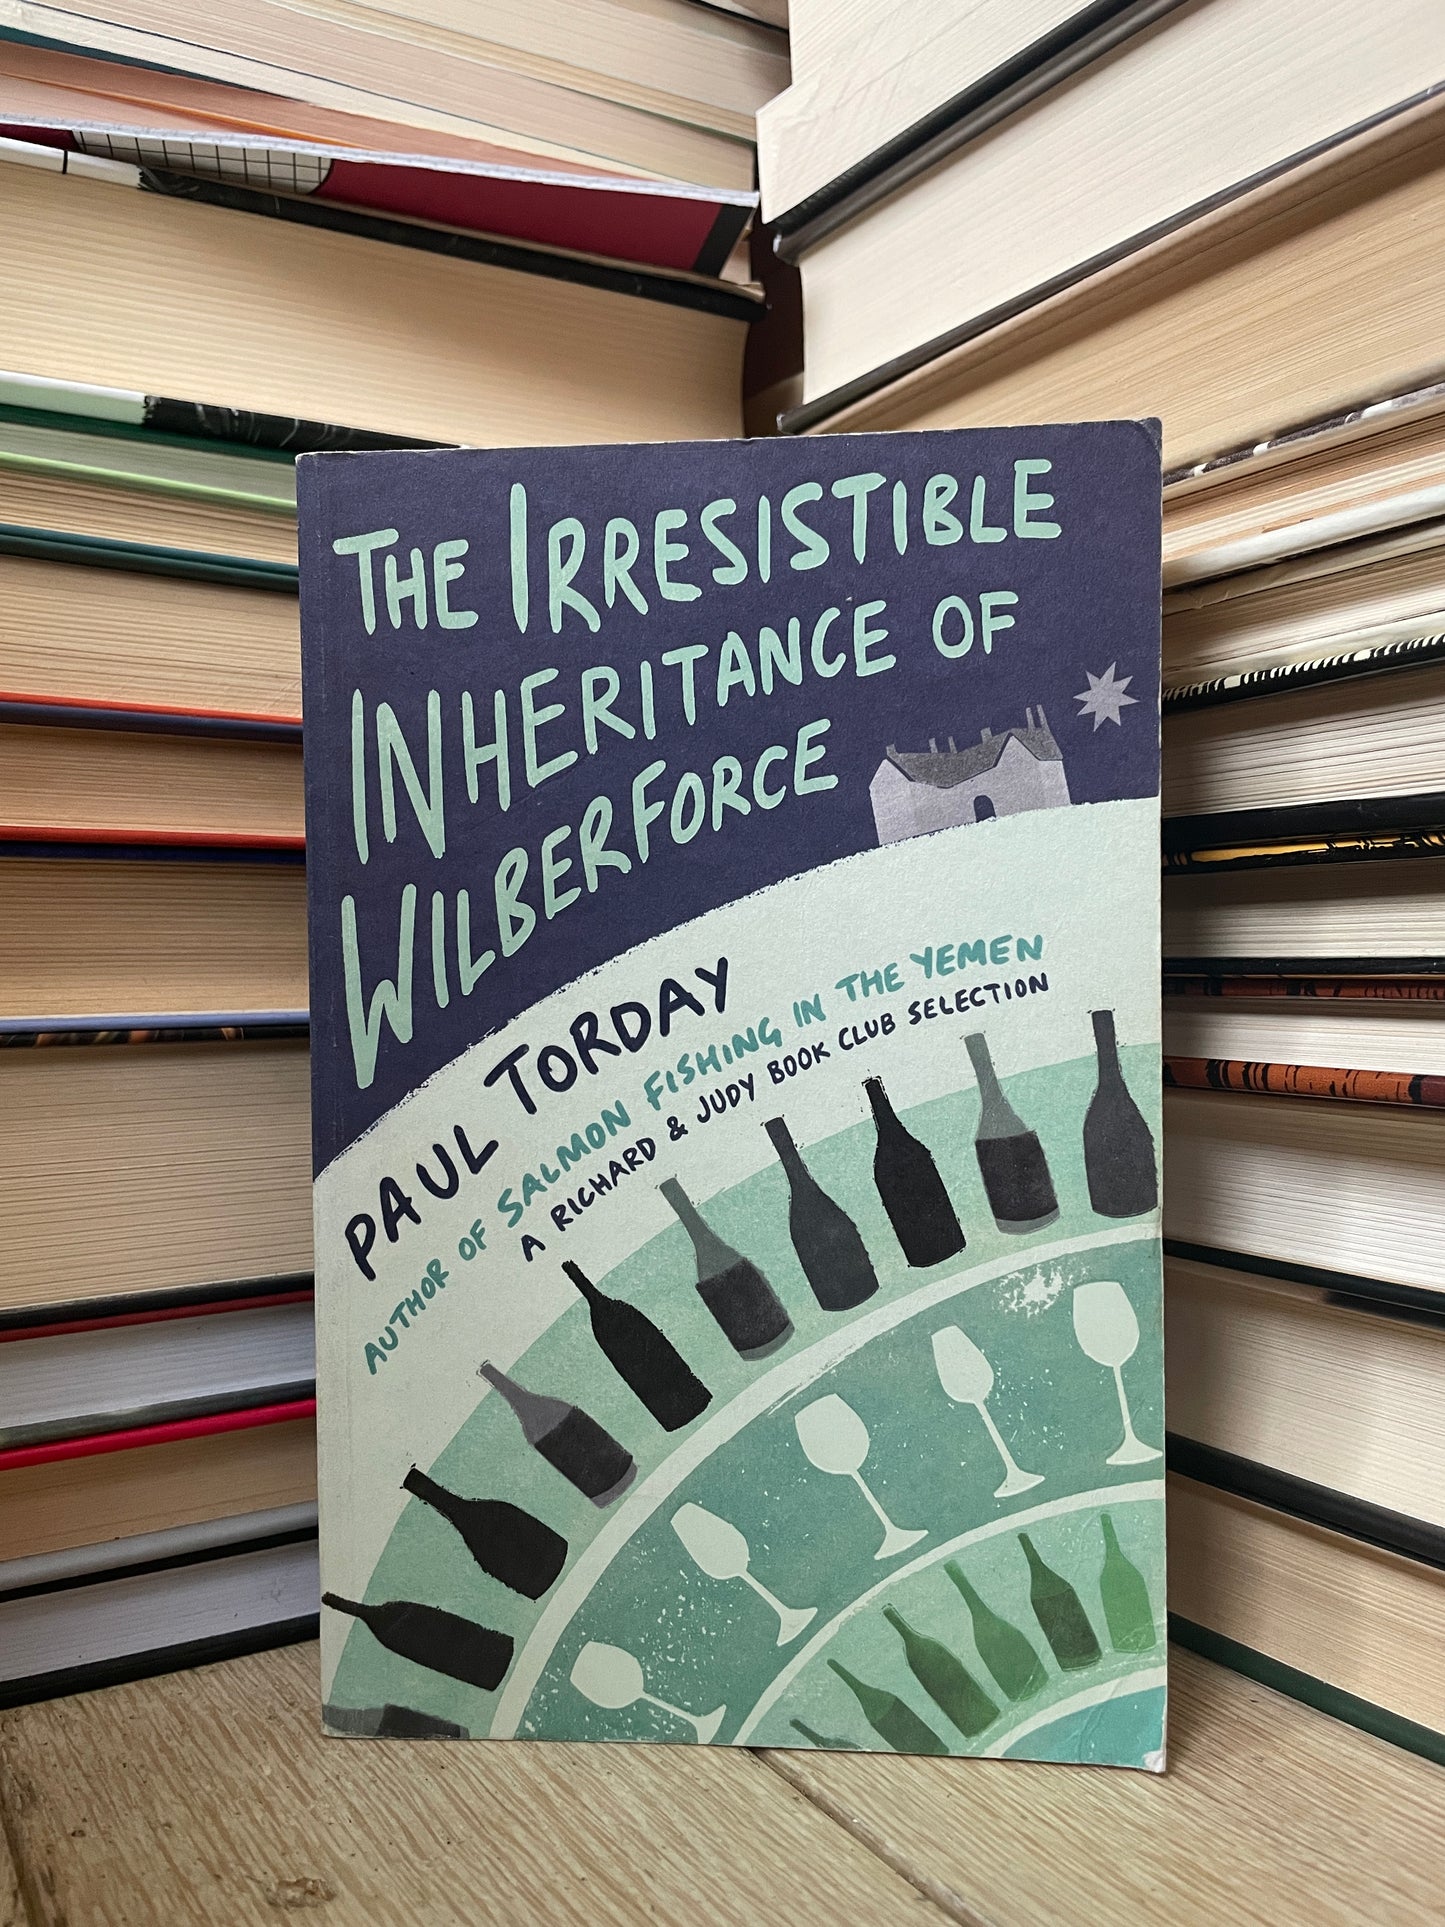 Paul Torday - The Irresistible Inheritance of Wilberforce